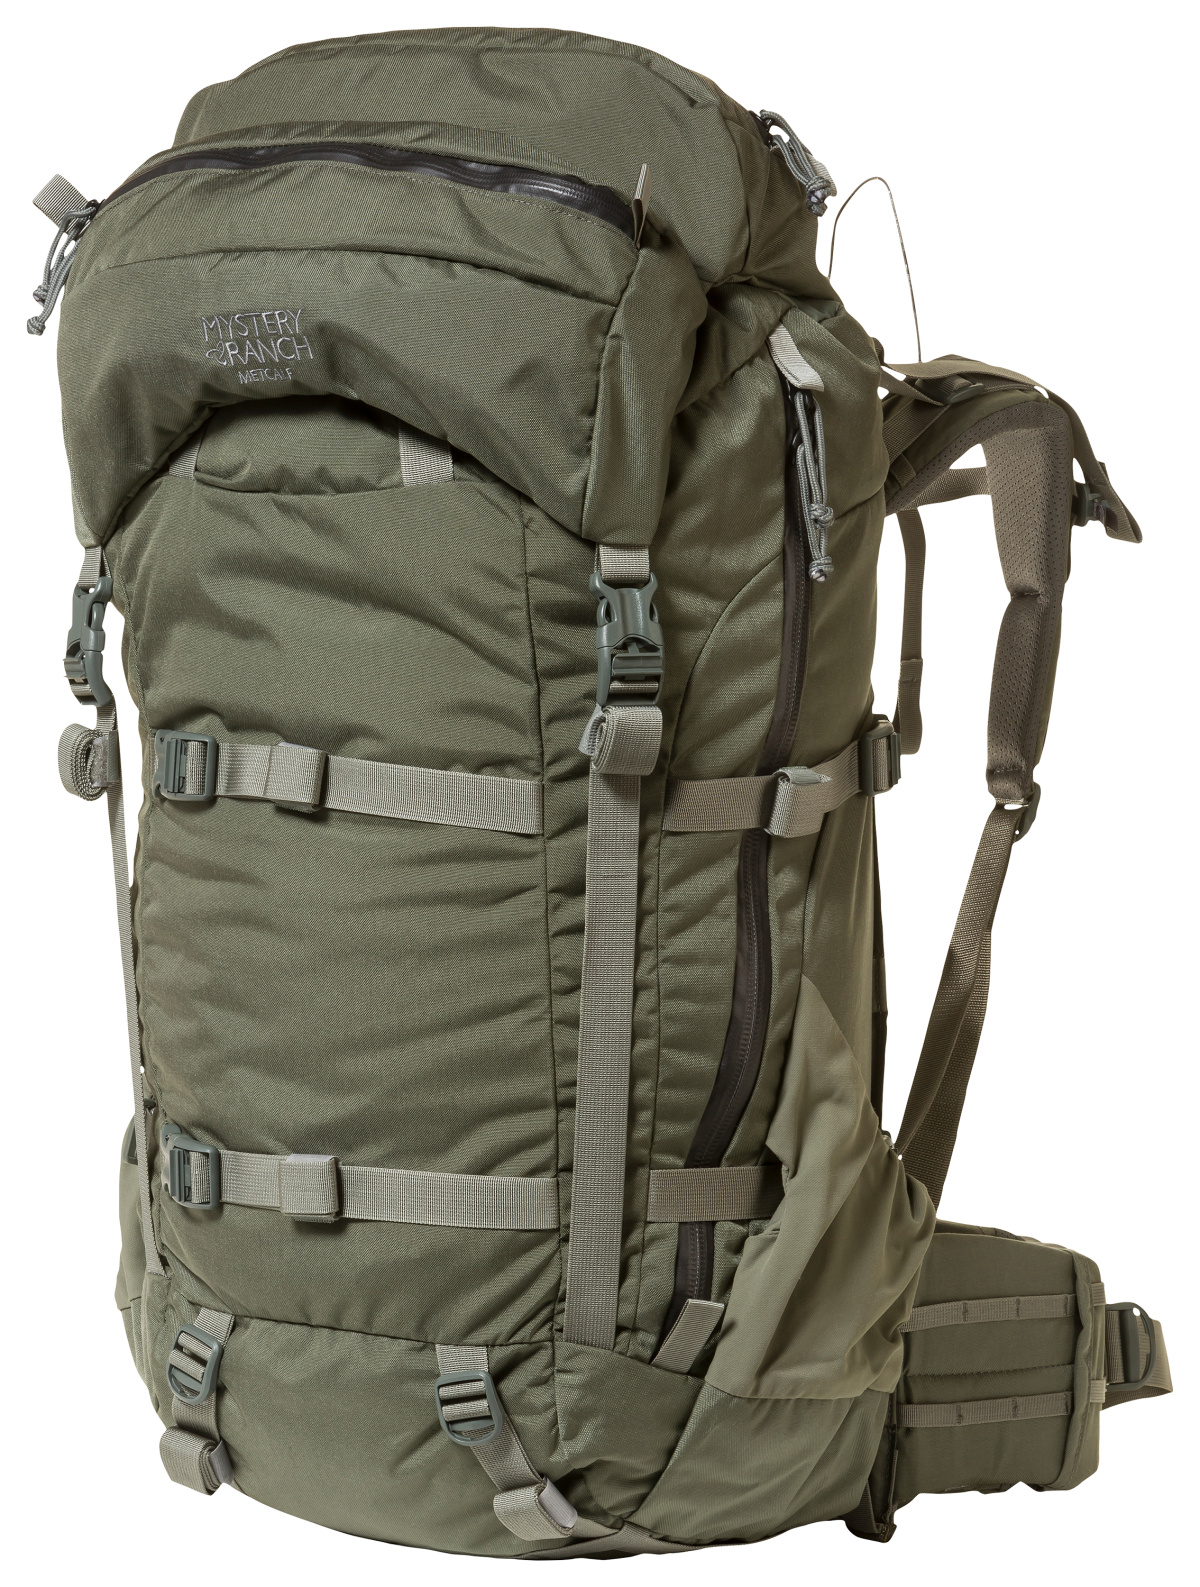 Mystery Ranch Metcalf Backpack - Foliage - L